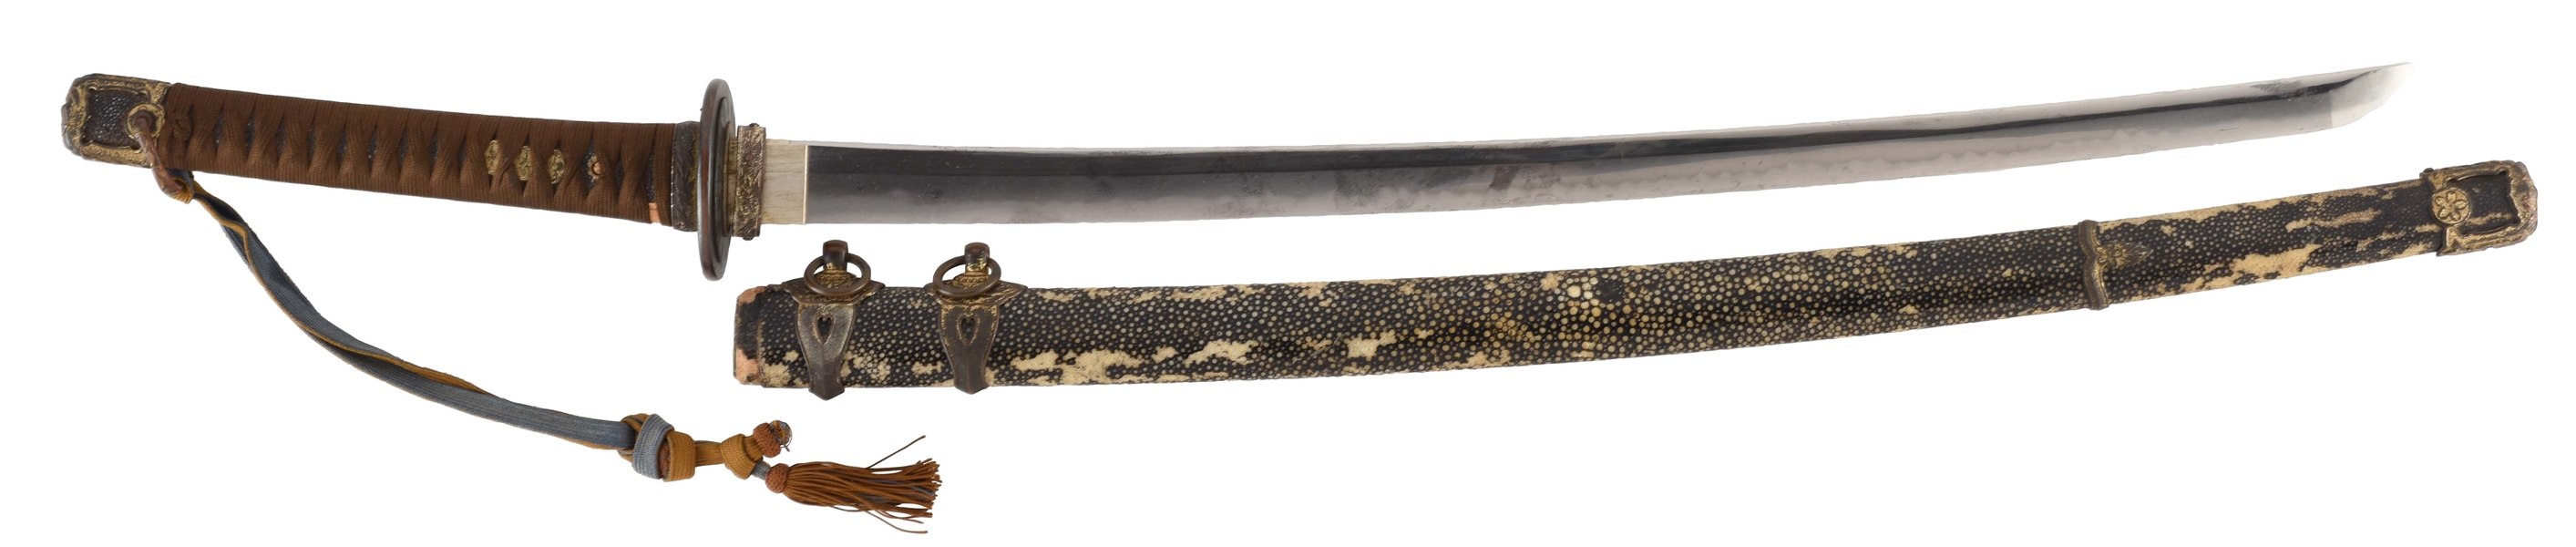 HISTORIC JAPANESE WWII NAVAL OFFICERS SWORD, GIVEN BY ADMIRAL WILLIAM HALSEY TO THE WIDOW OF ADMIRAL JOHN SIDNEY MCCAIN, SEPTEMBER 18, 1945.